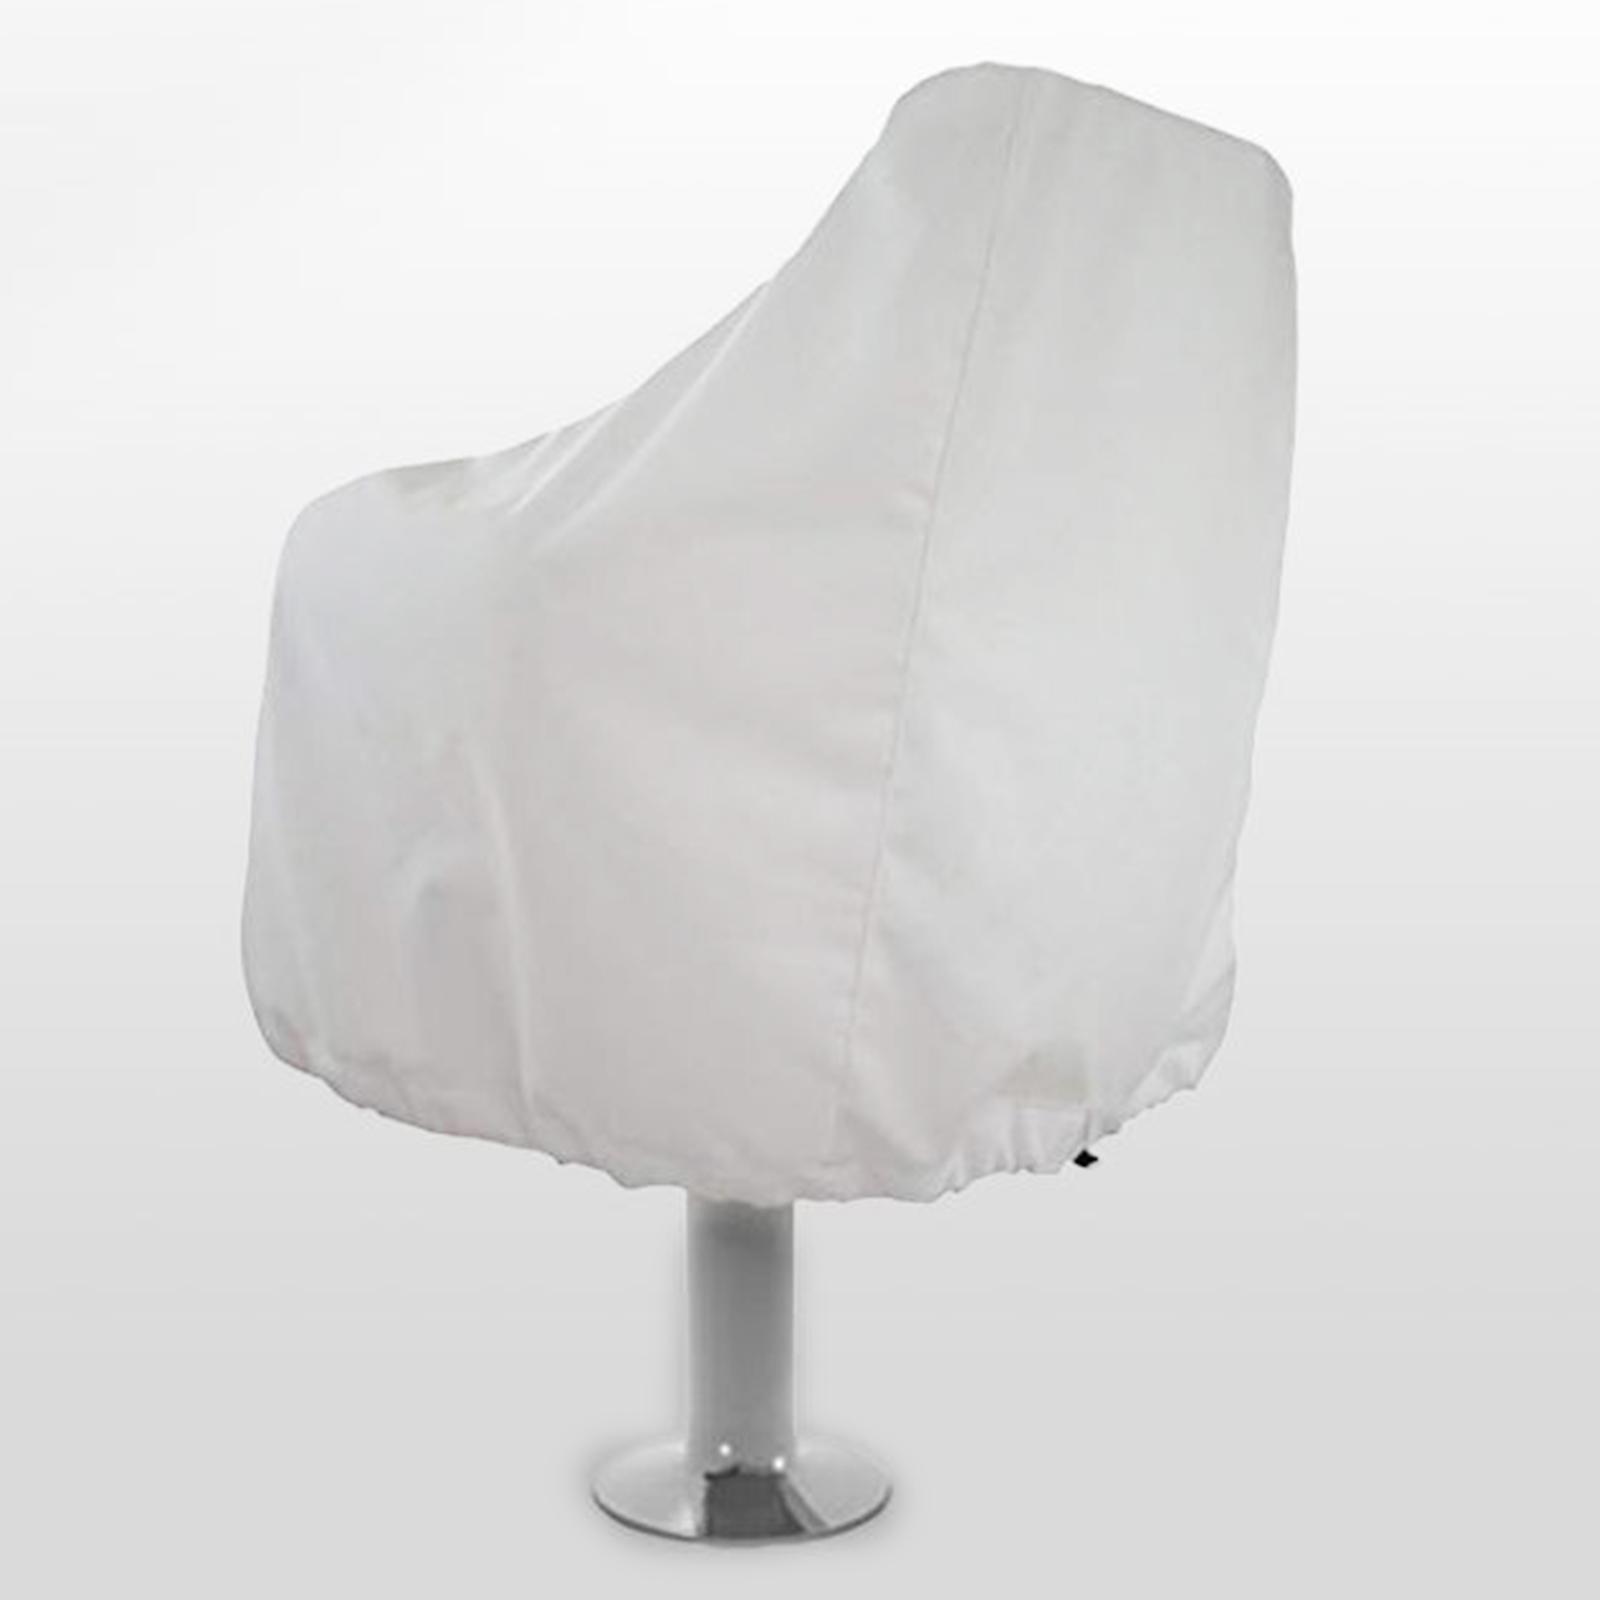 Helmsman Boat Seat Cover Outdoor Folding-Resistant Fishing Chair Cover